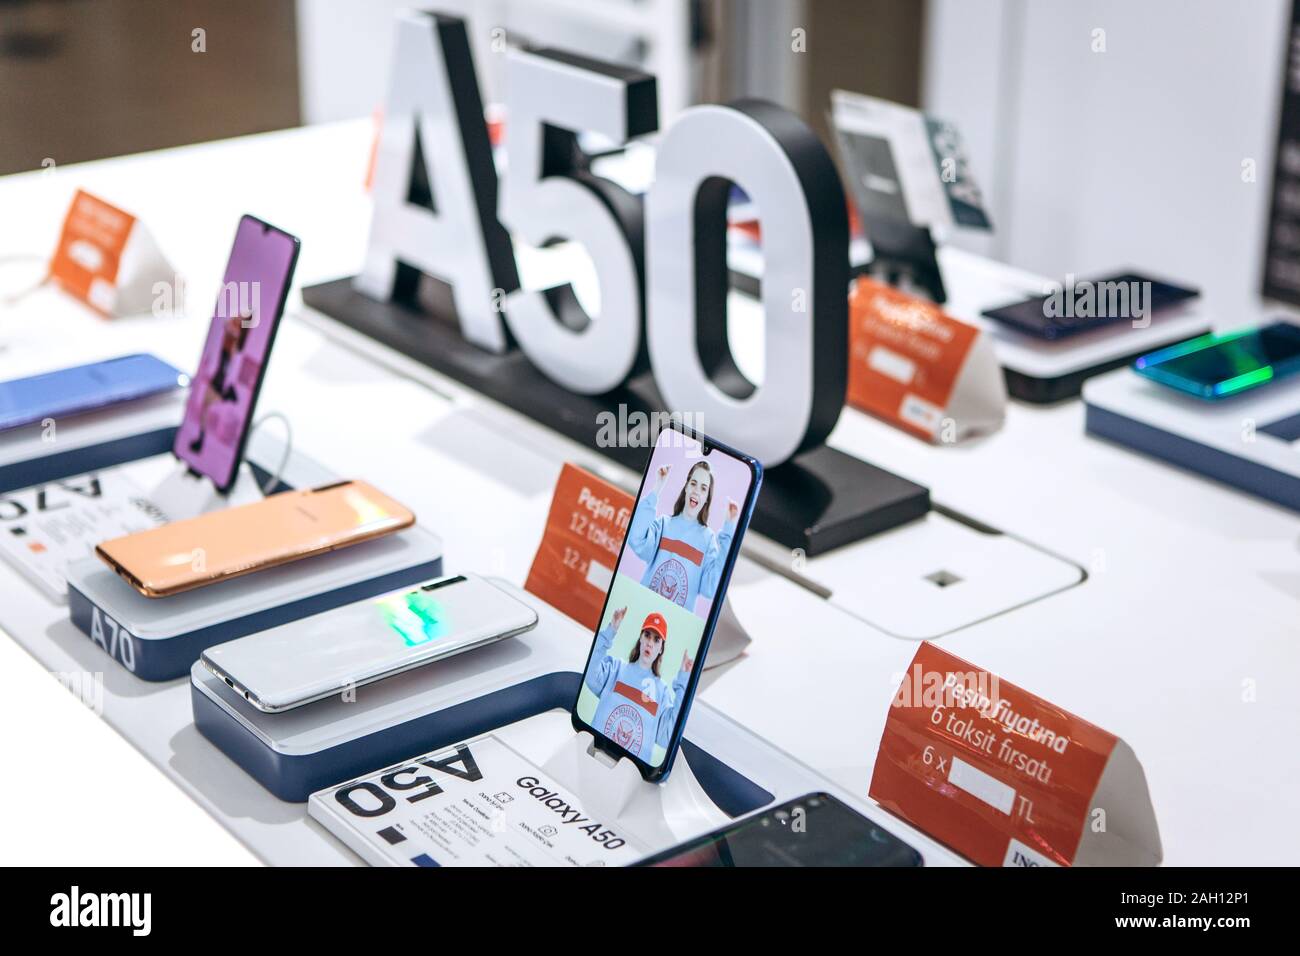 Turkey, Istanbul, December 20, 2019: Sale of new Samsung Galaxy A50 cell phones in the official Samsung store. Stock Photo